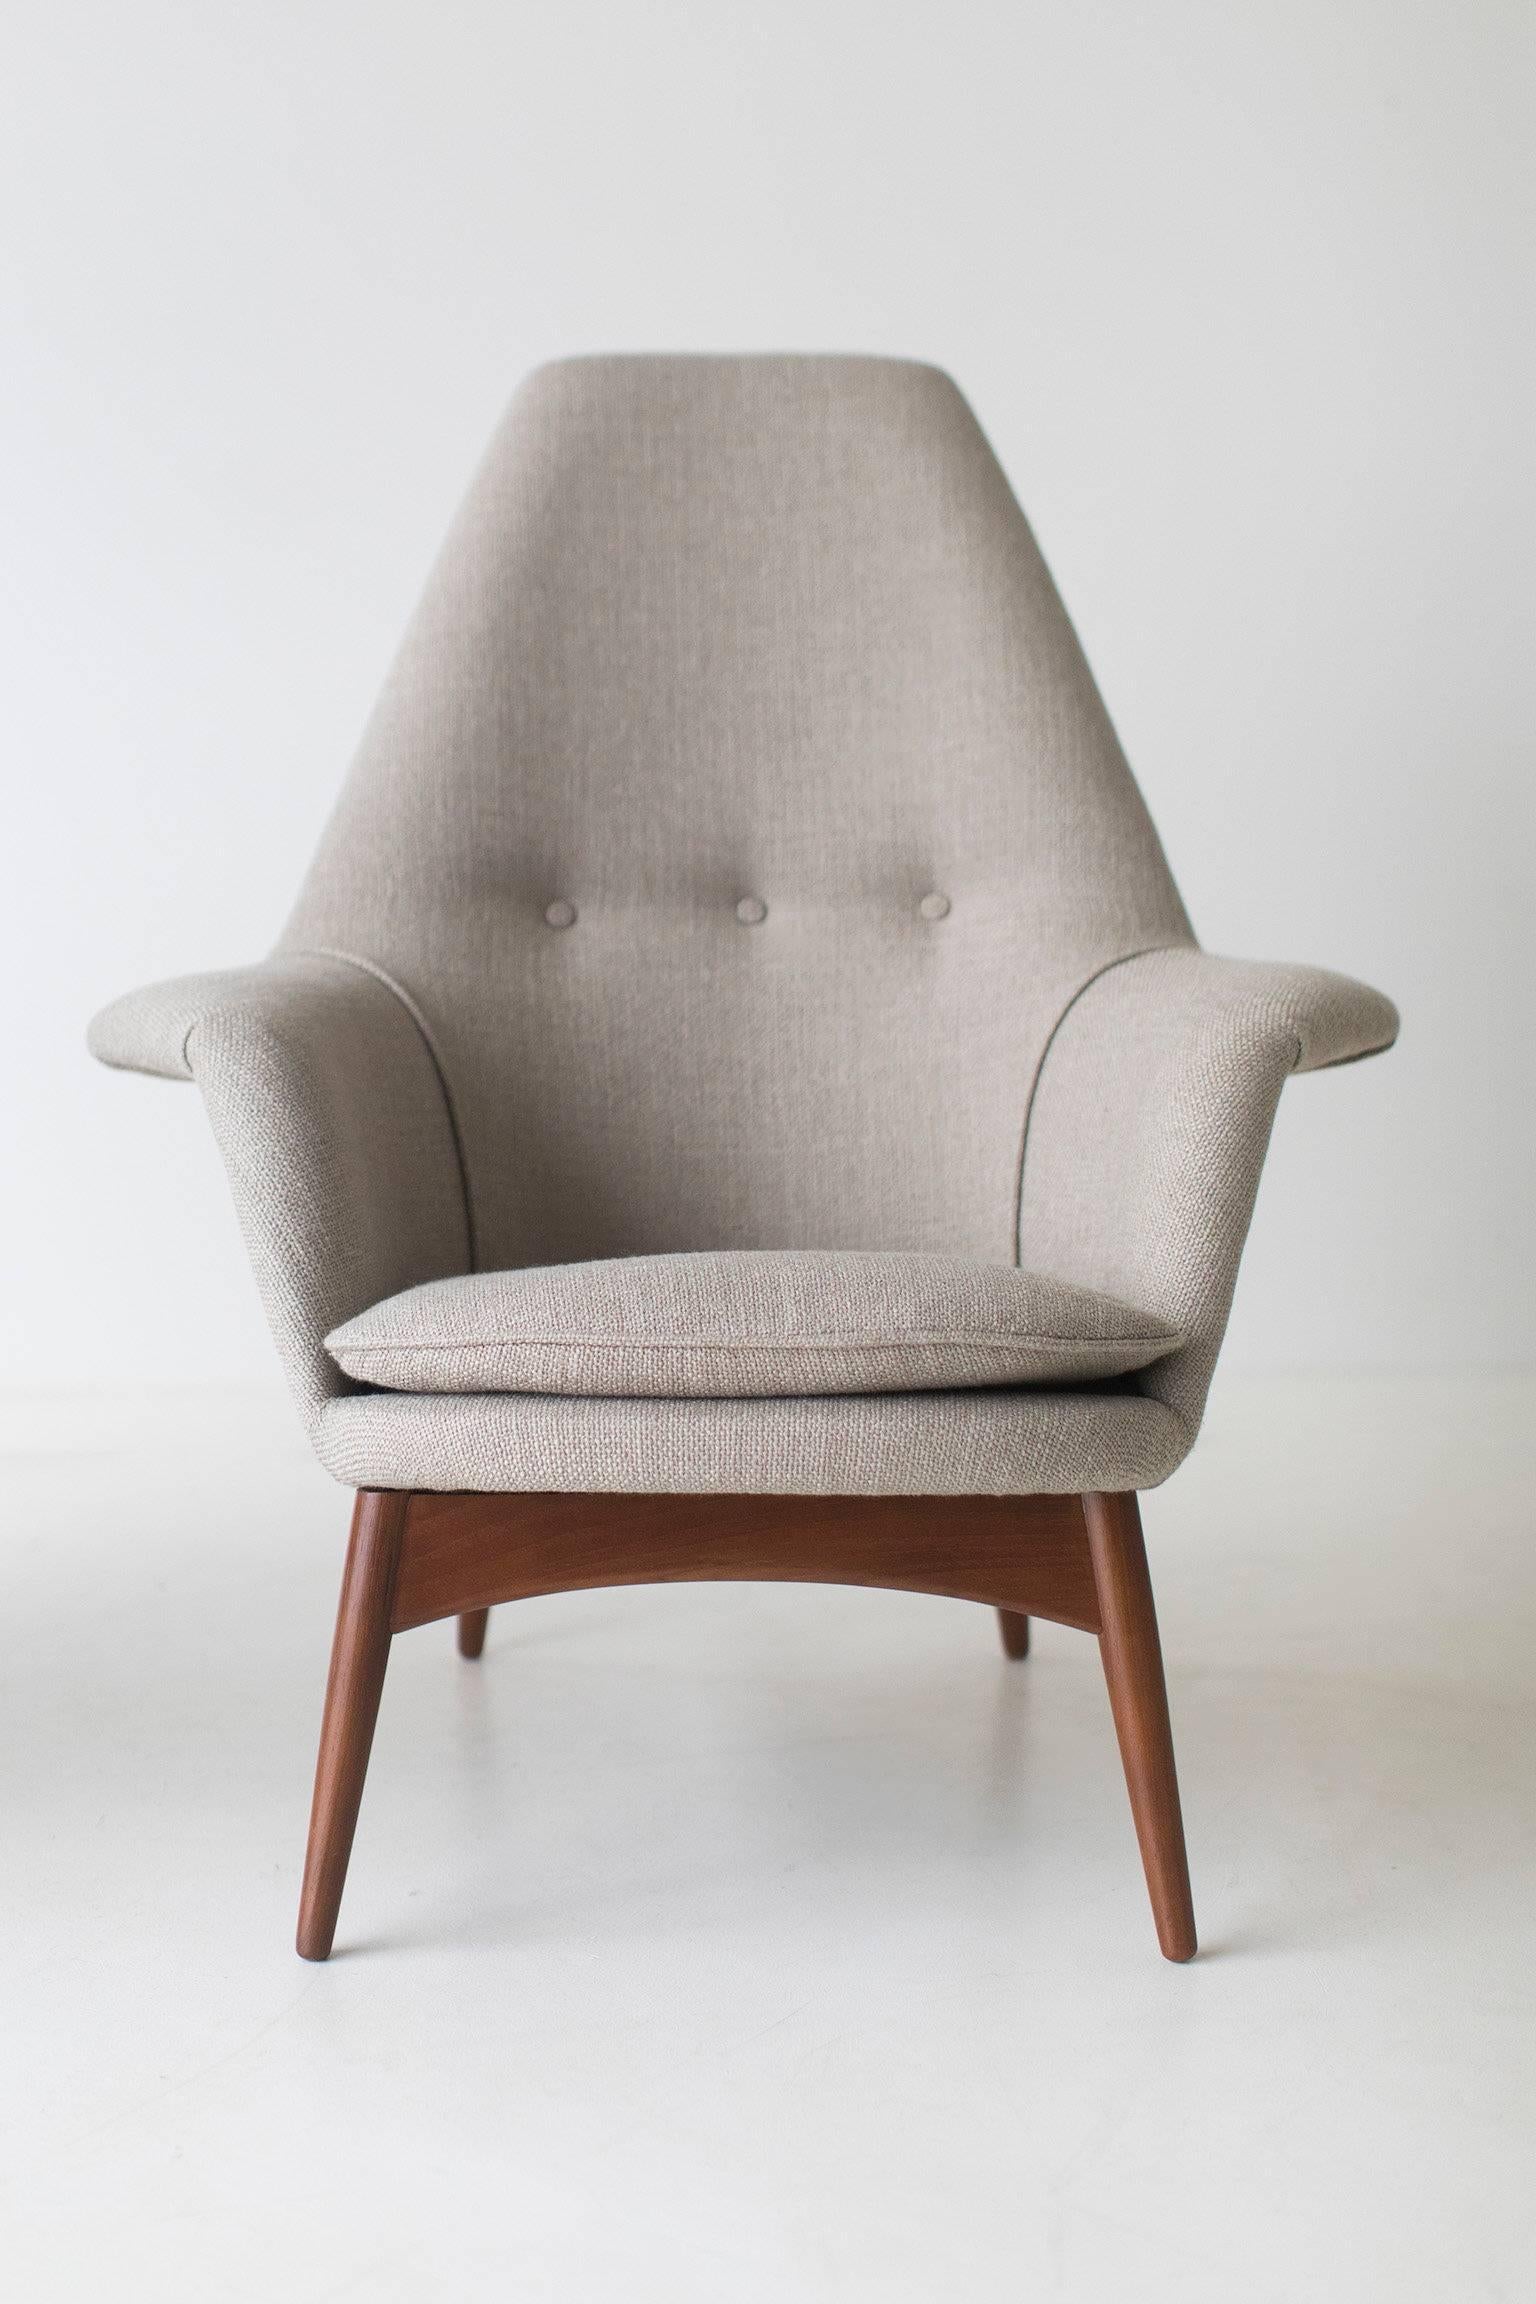 Mid-20th Century Björn Engö Manta Ray Lounge Chairs, Importer DUX Furniture